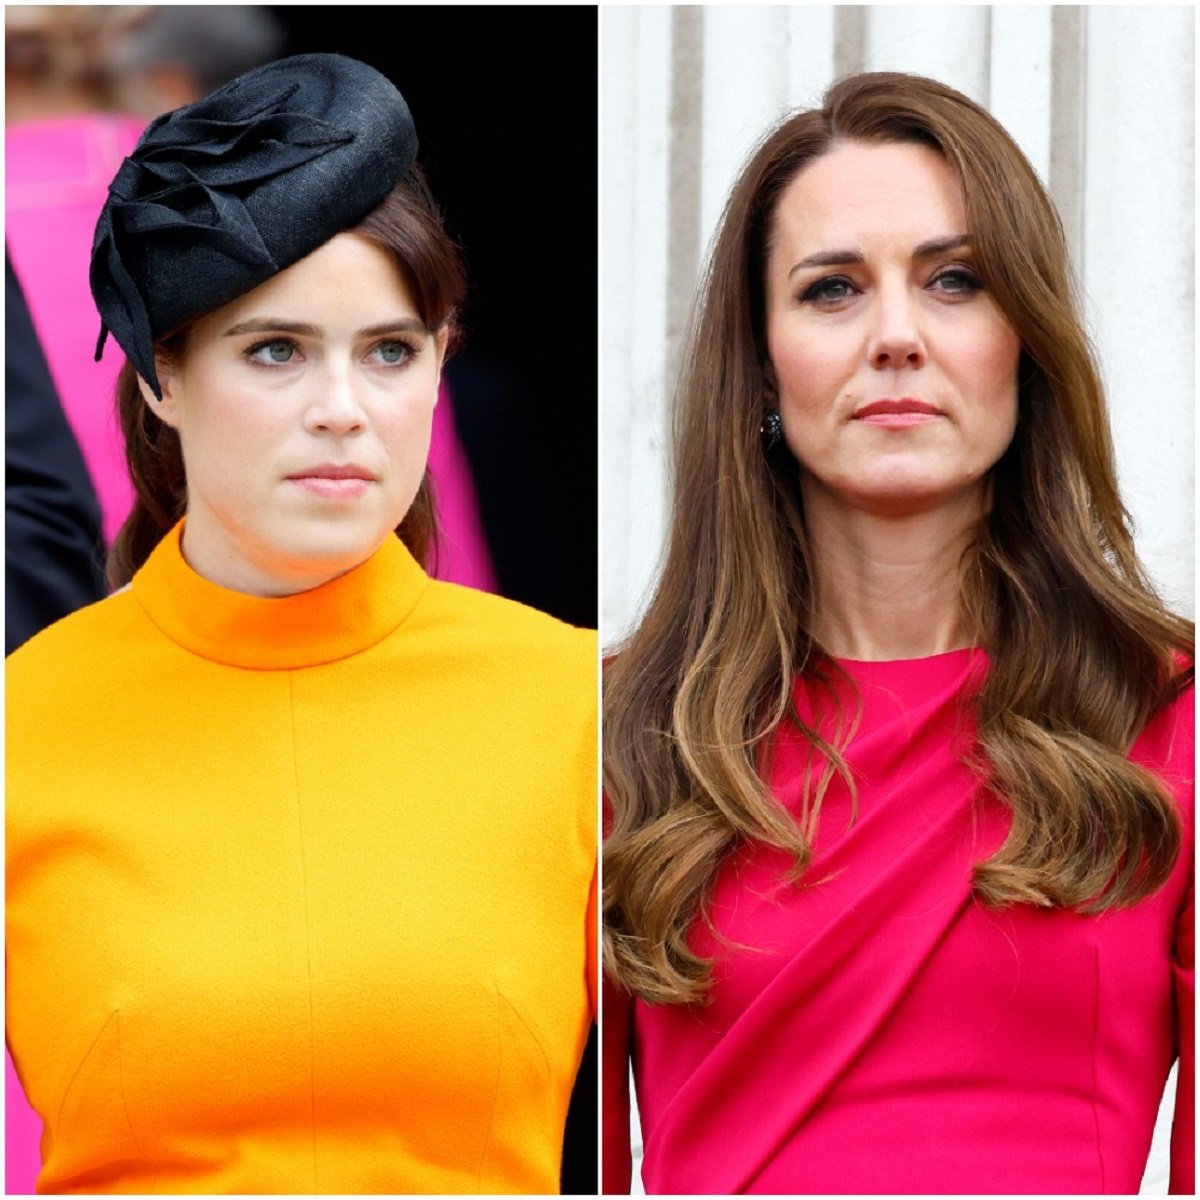 Princess Eugenie Sparks Kate Middleton Feud Rumors After Cropping the Duchess Out of a Picture